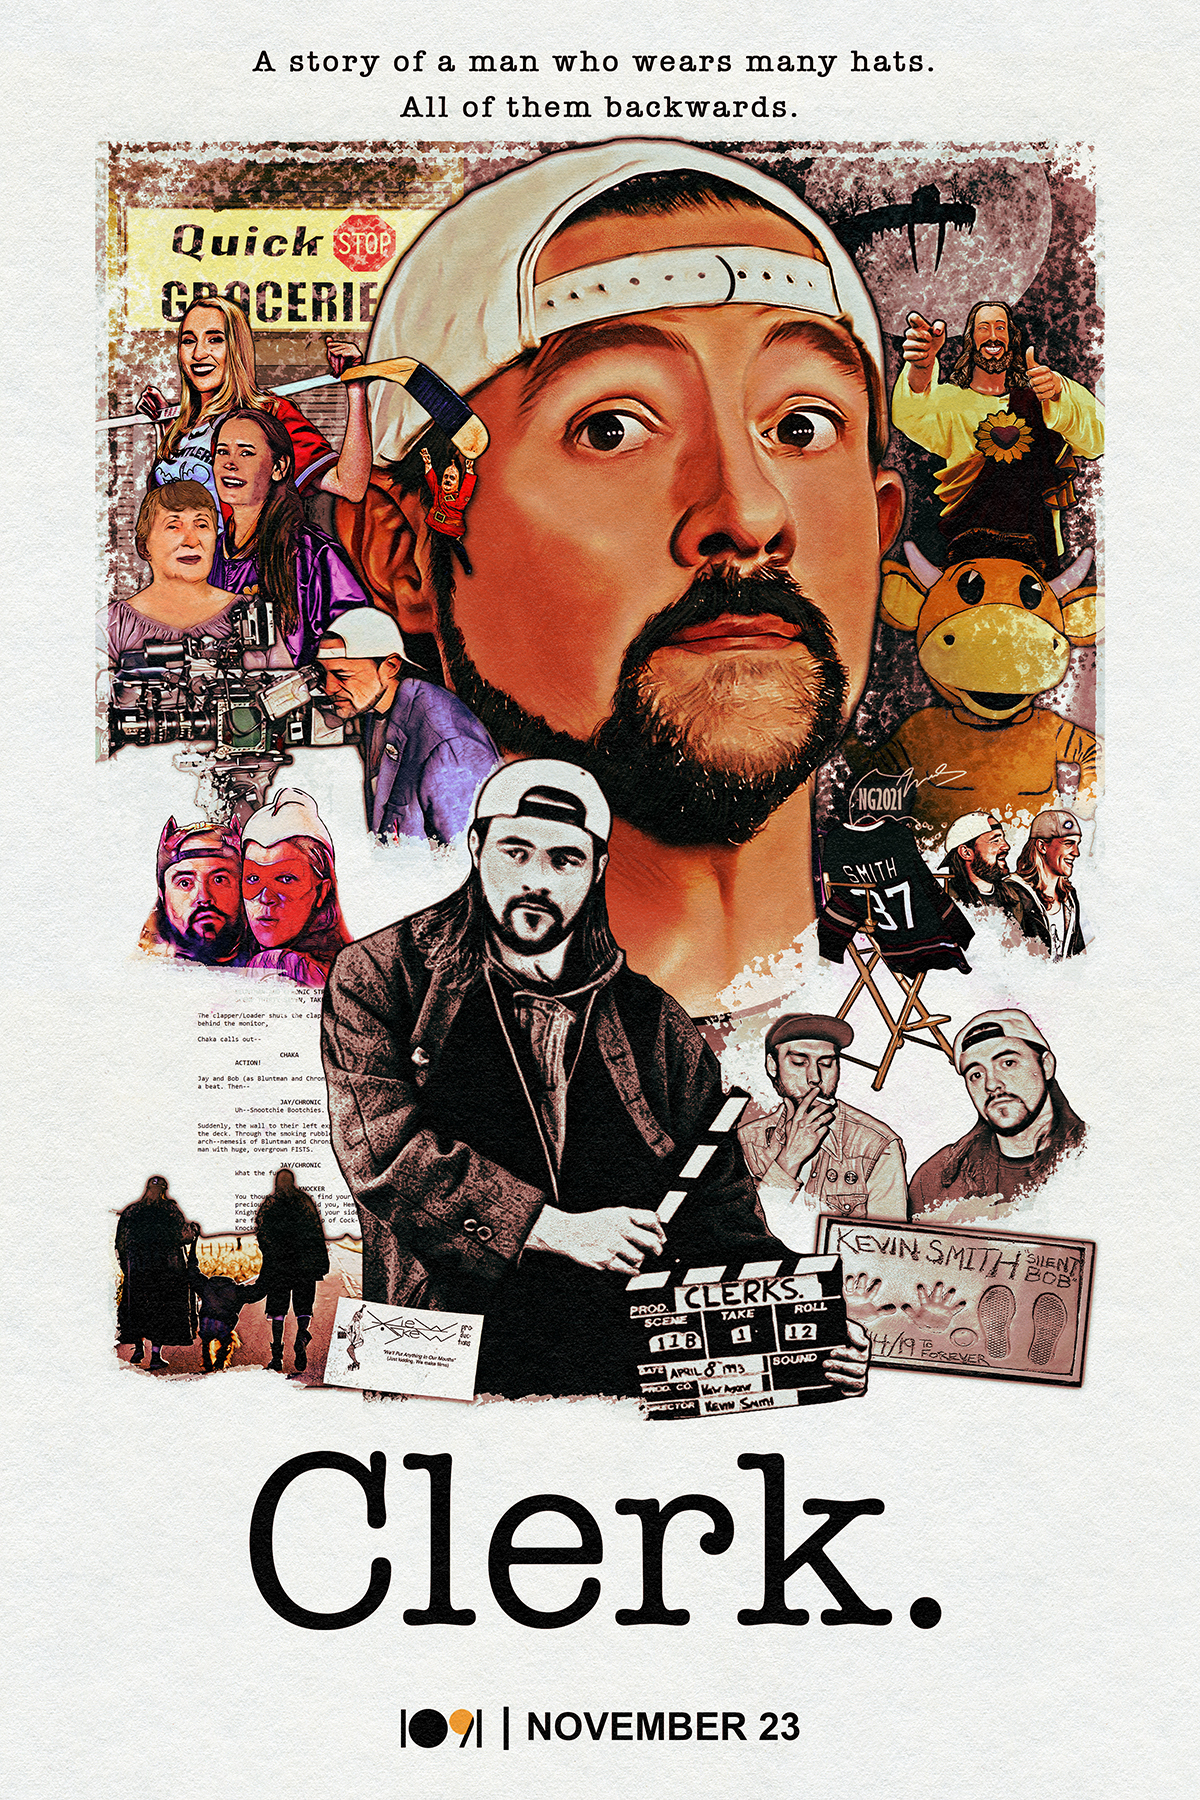 Clerk. — A Documentary on Kevin Smith